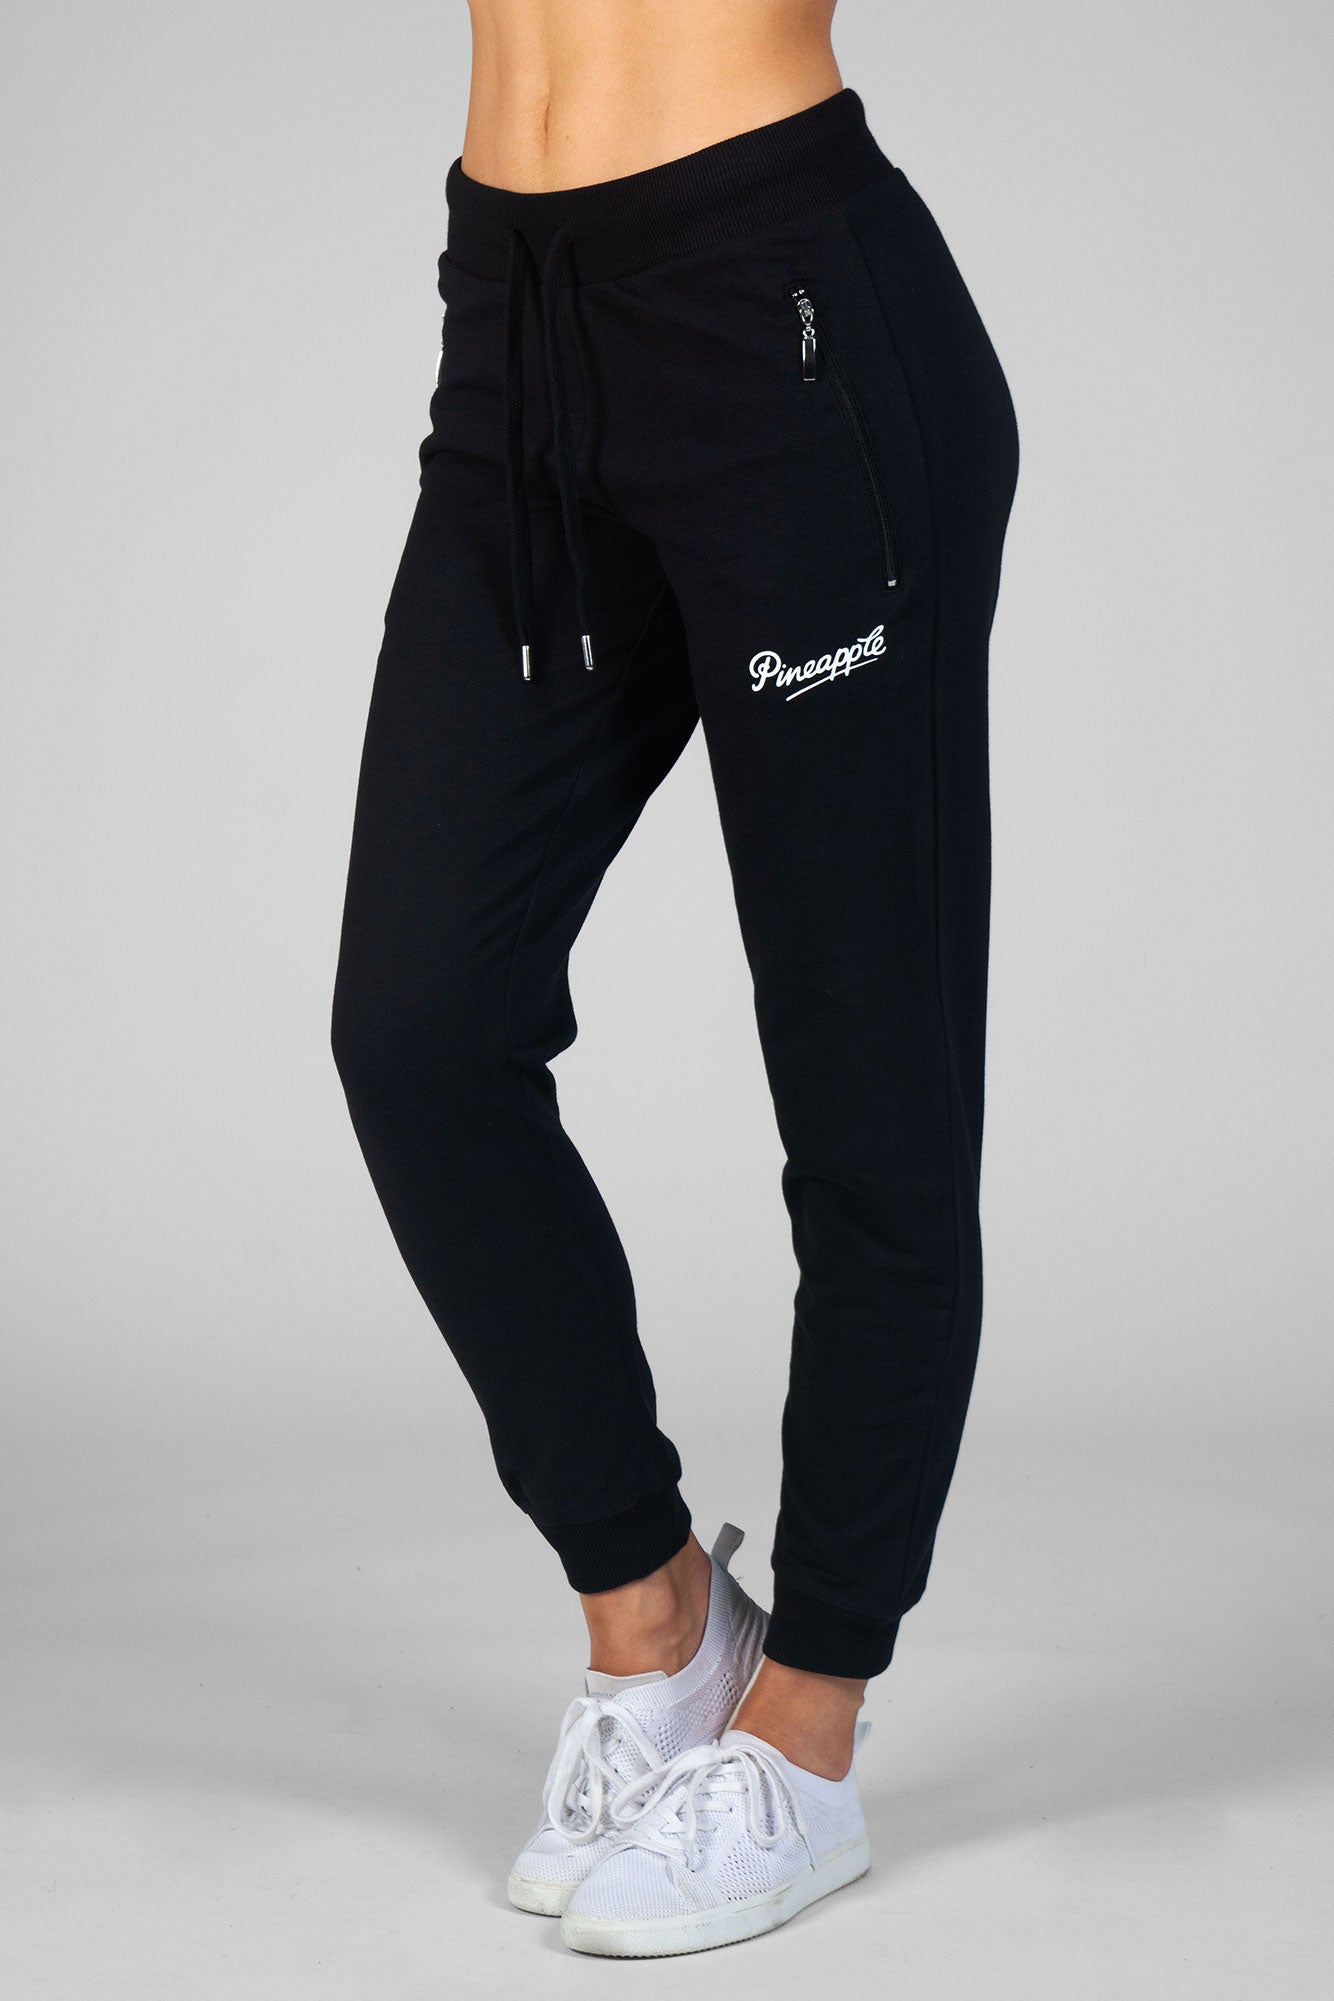 Buy Latest Joggers for Women Online in India - Westside